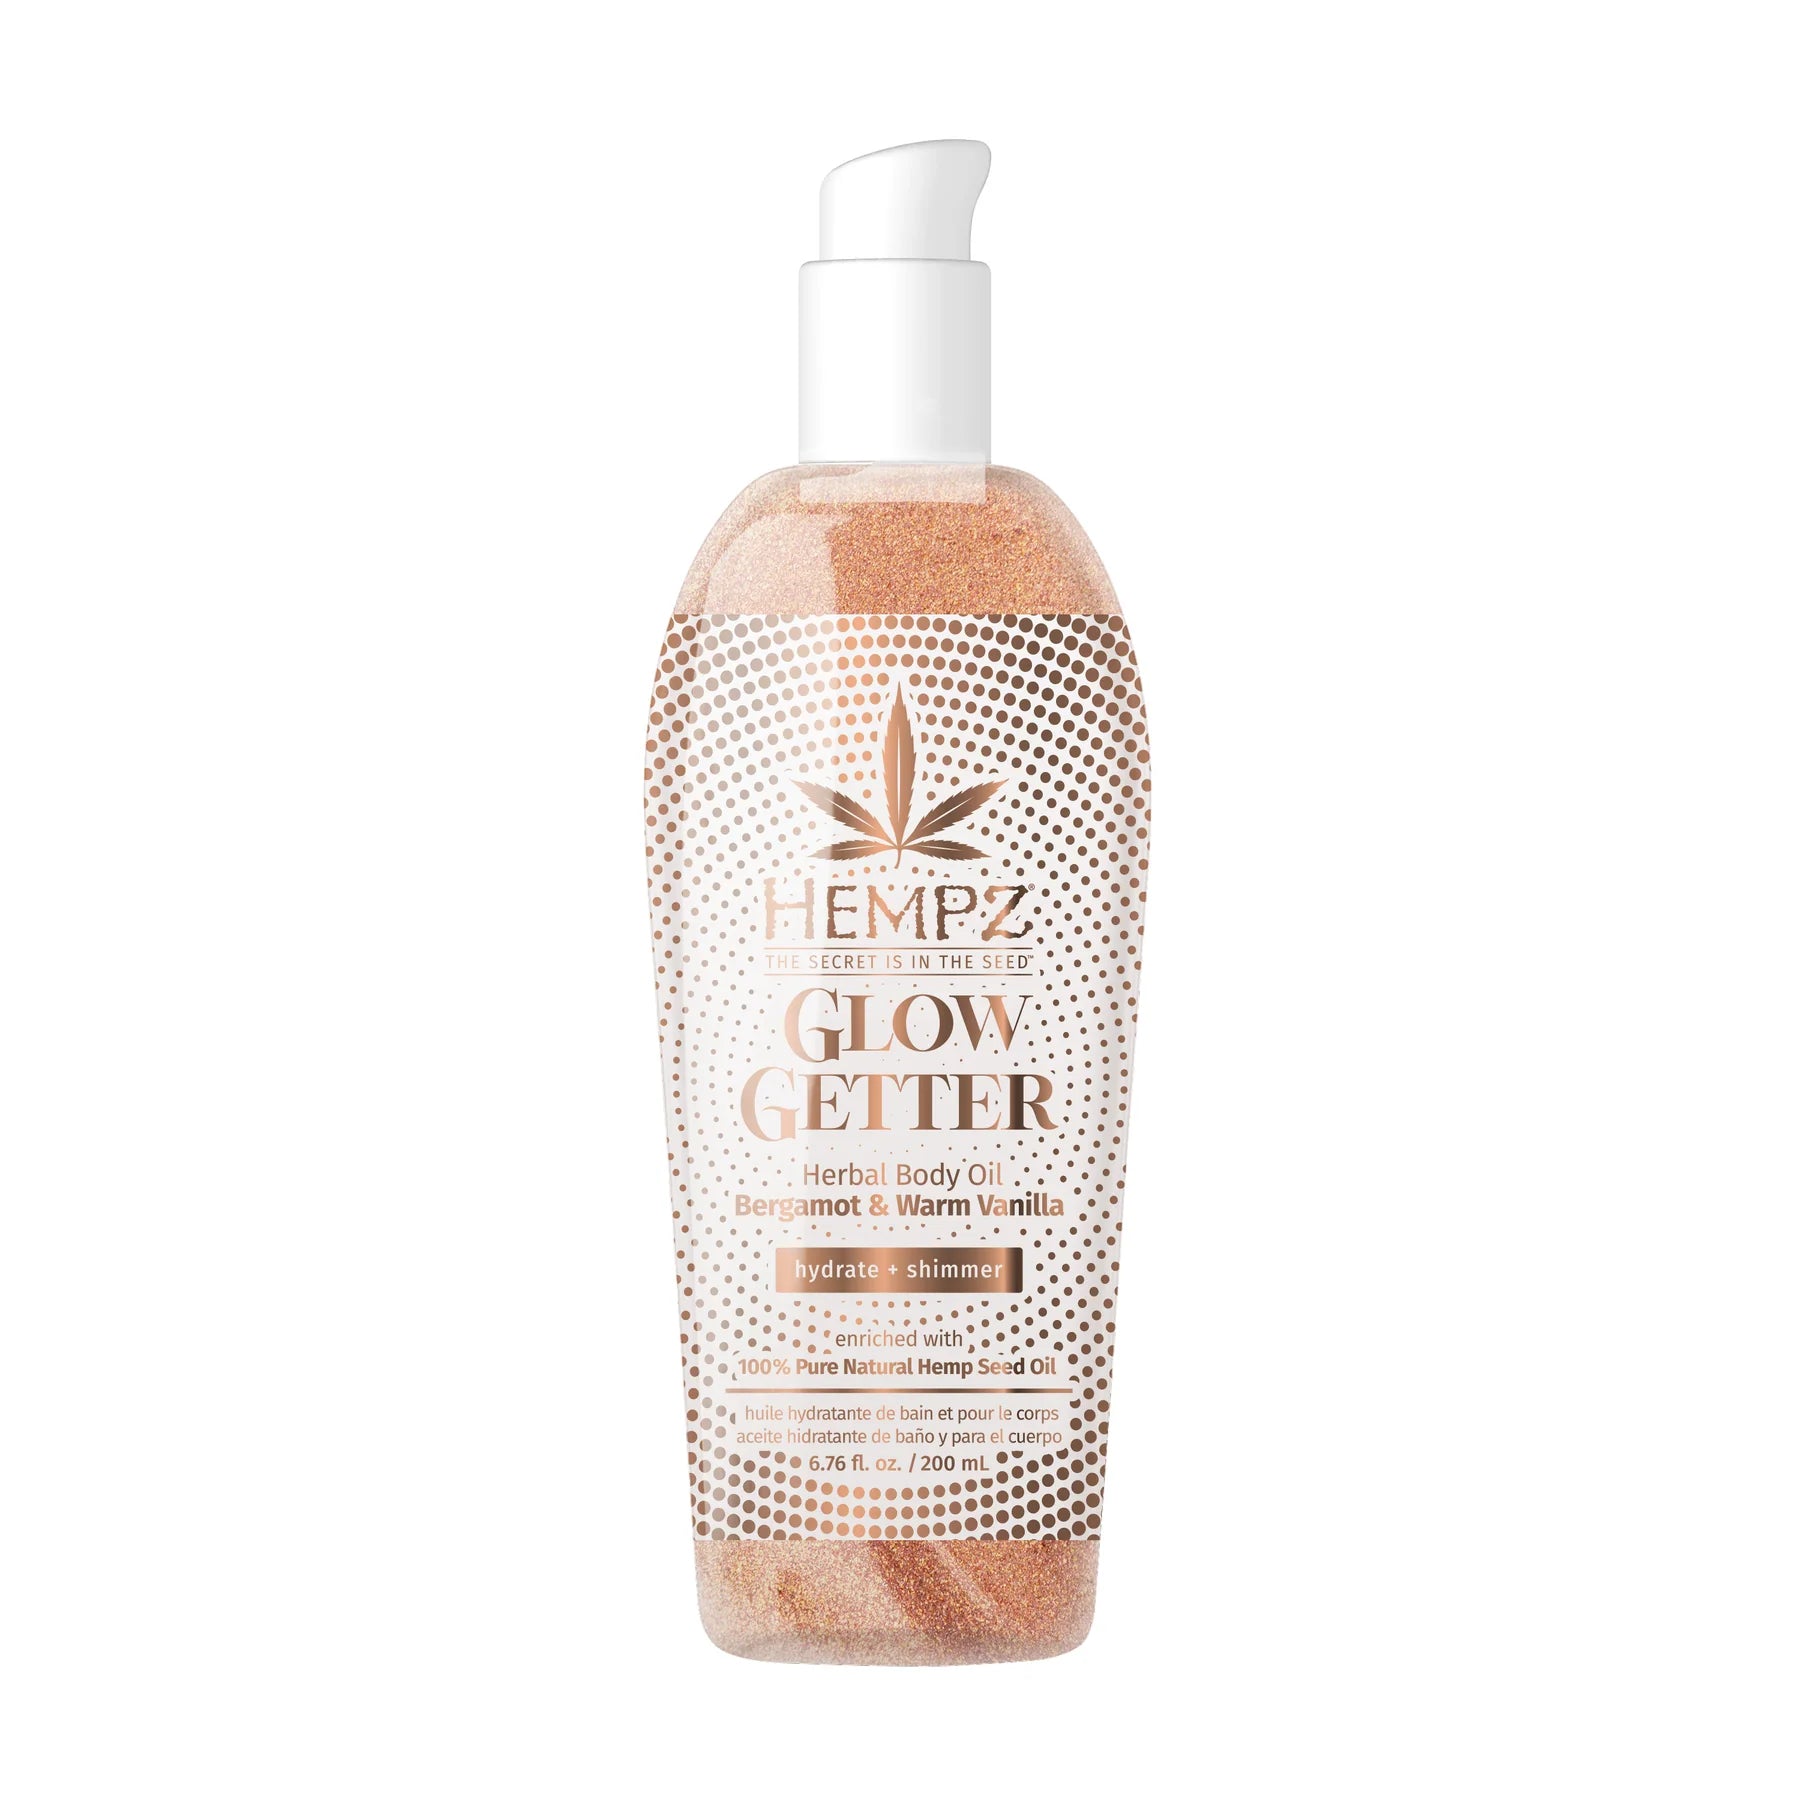 Hempz - Glow Getter Herbal Body Oil 6.76 oz. - with Shimmer - Creata Beauty - Professional Beauty Products